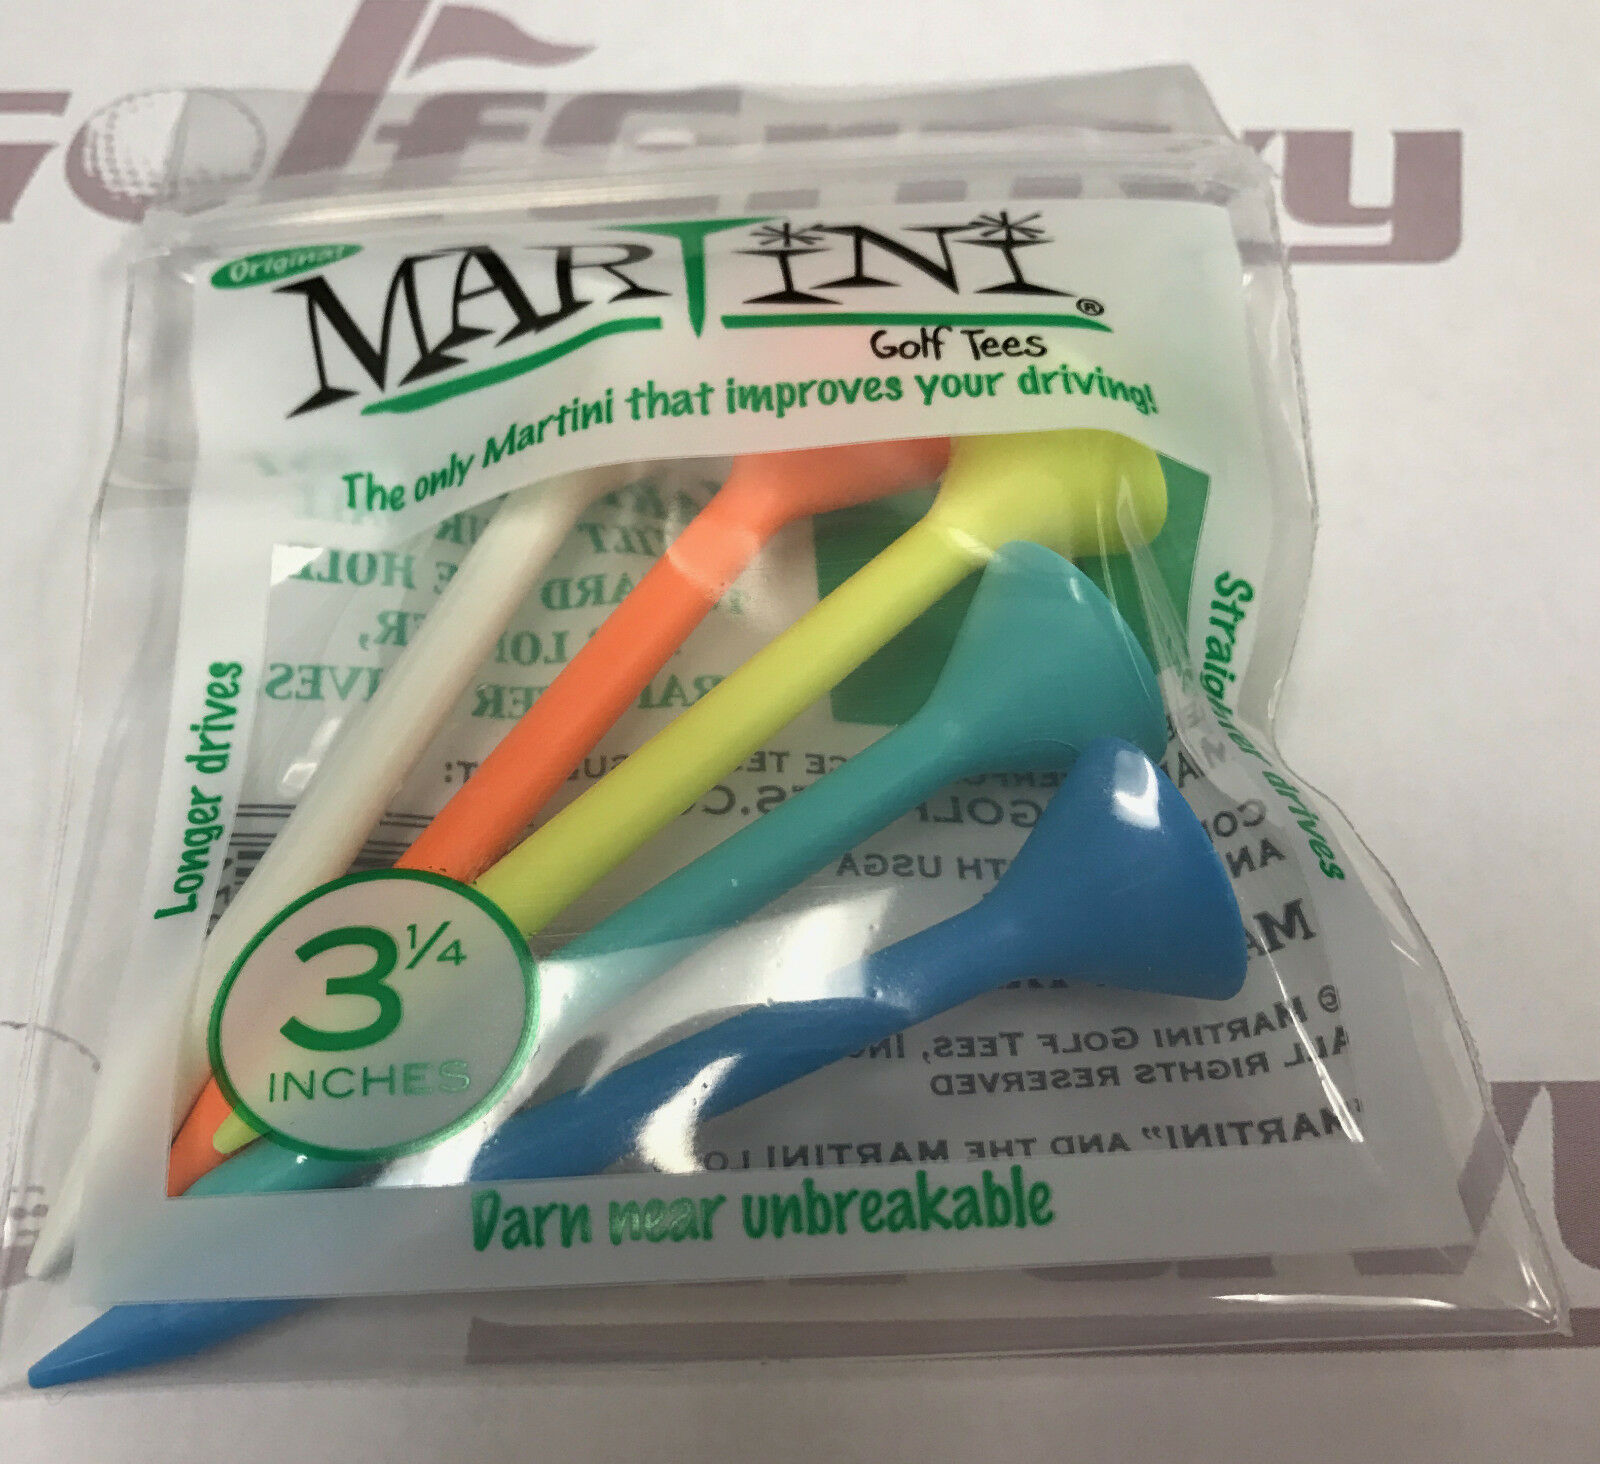 Martini Golf Tees - 1 Pack Of 5 Assorted Color Original Tees 3 1/4"